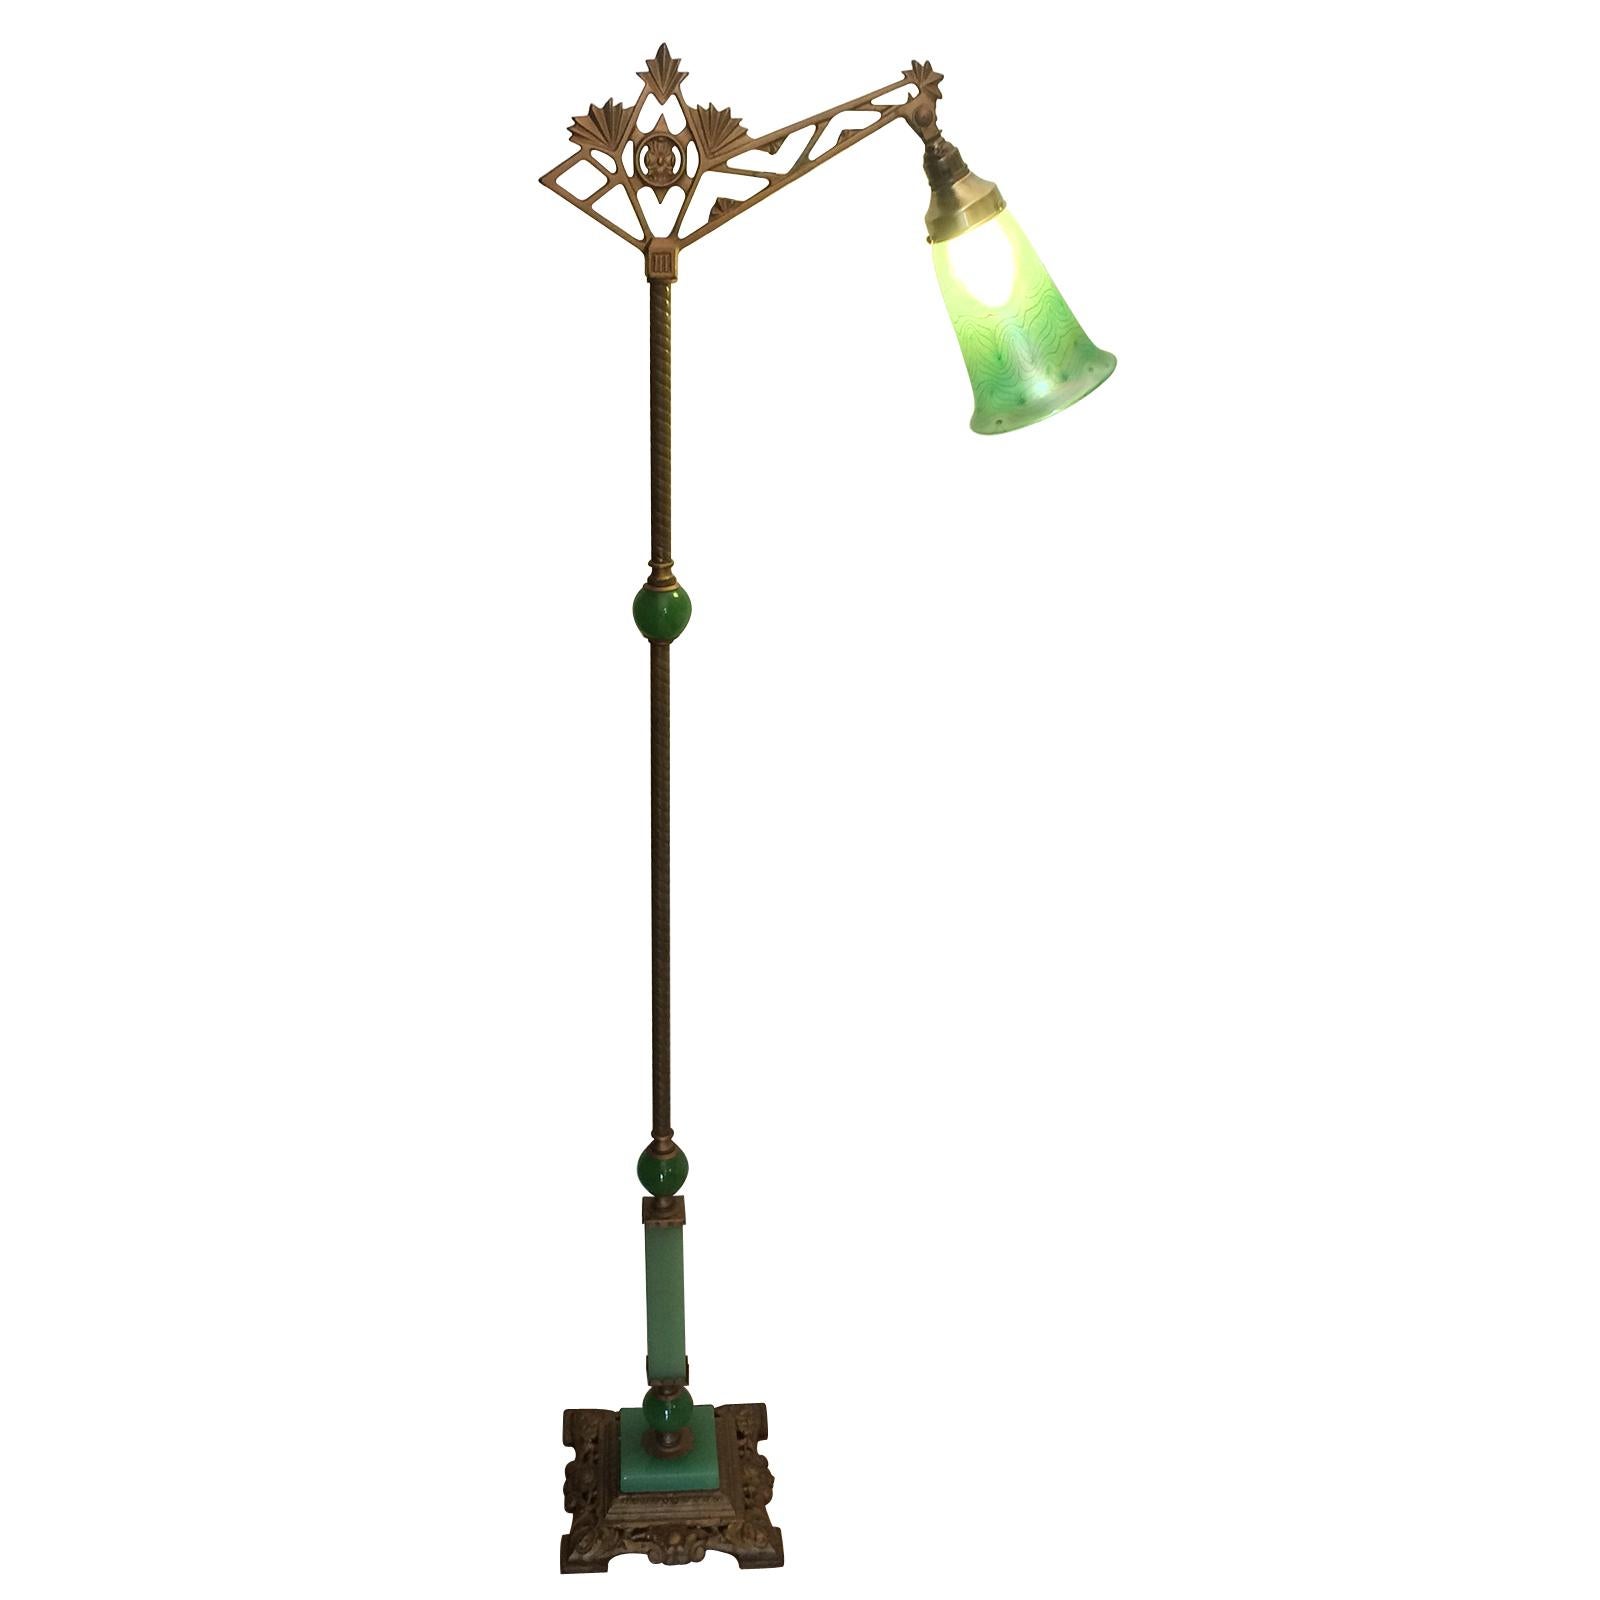 Art Nouveau American bridge lamp, with solid, lime green glass in slightly variable shades of green. The uppermost shade is in a green “Pulled Feather” shade in fantastic detail; the upper shade and holder can be tilted to adjust the light